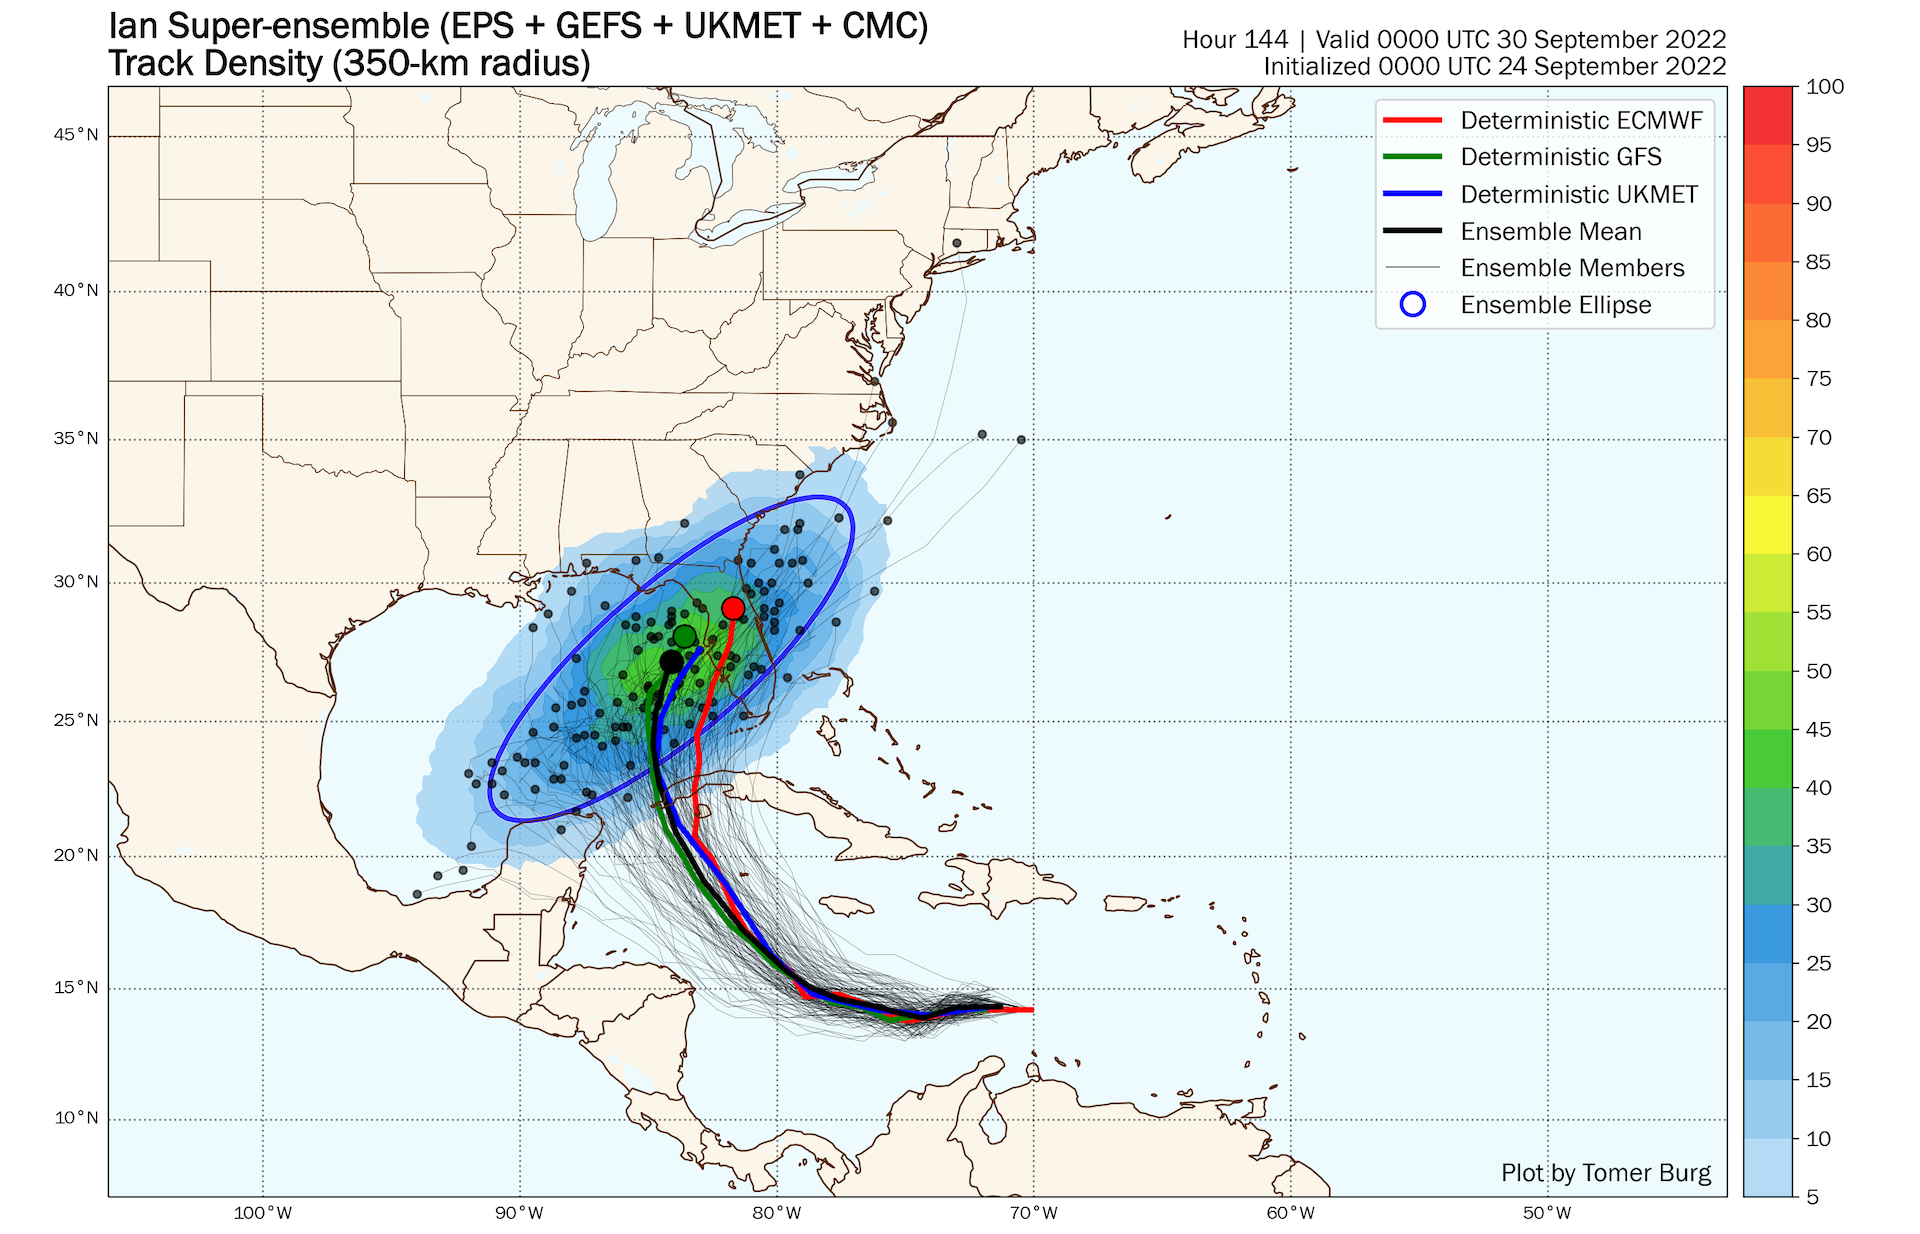 Computer model projections for Tropical Storm Ian as of Sept. 24.